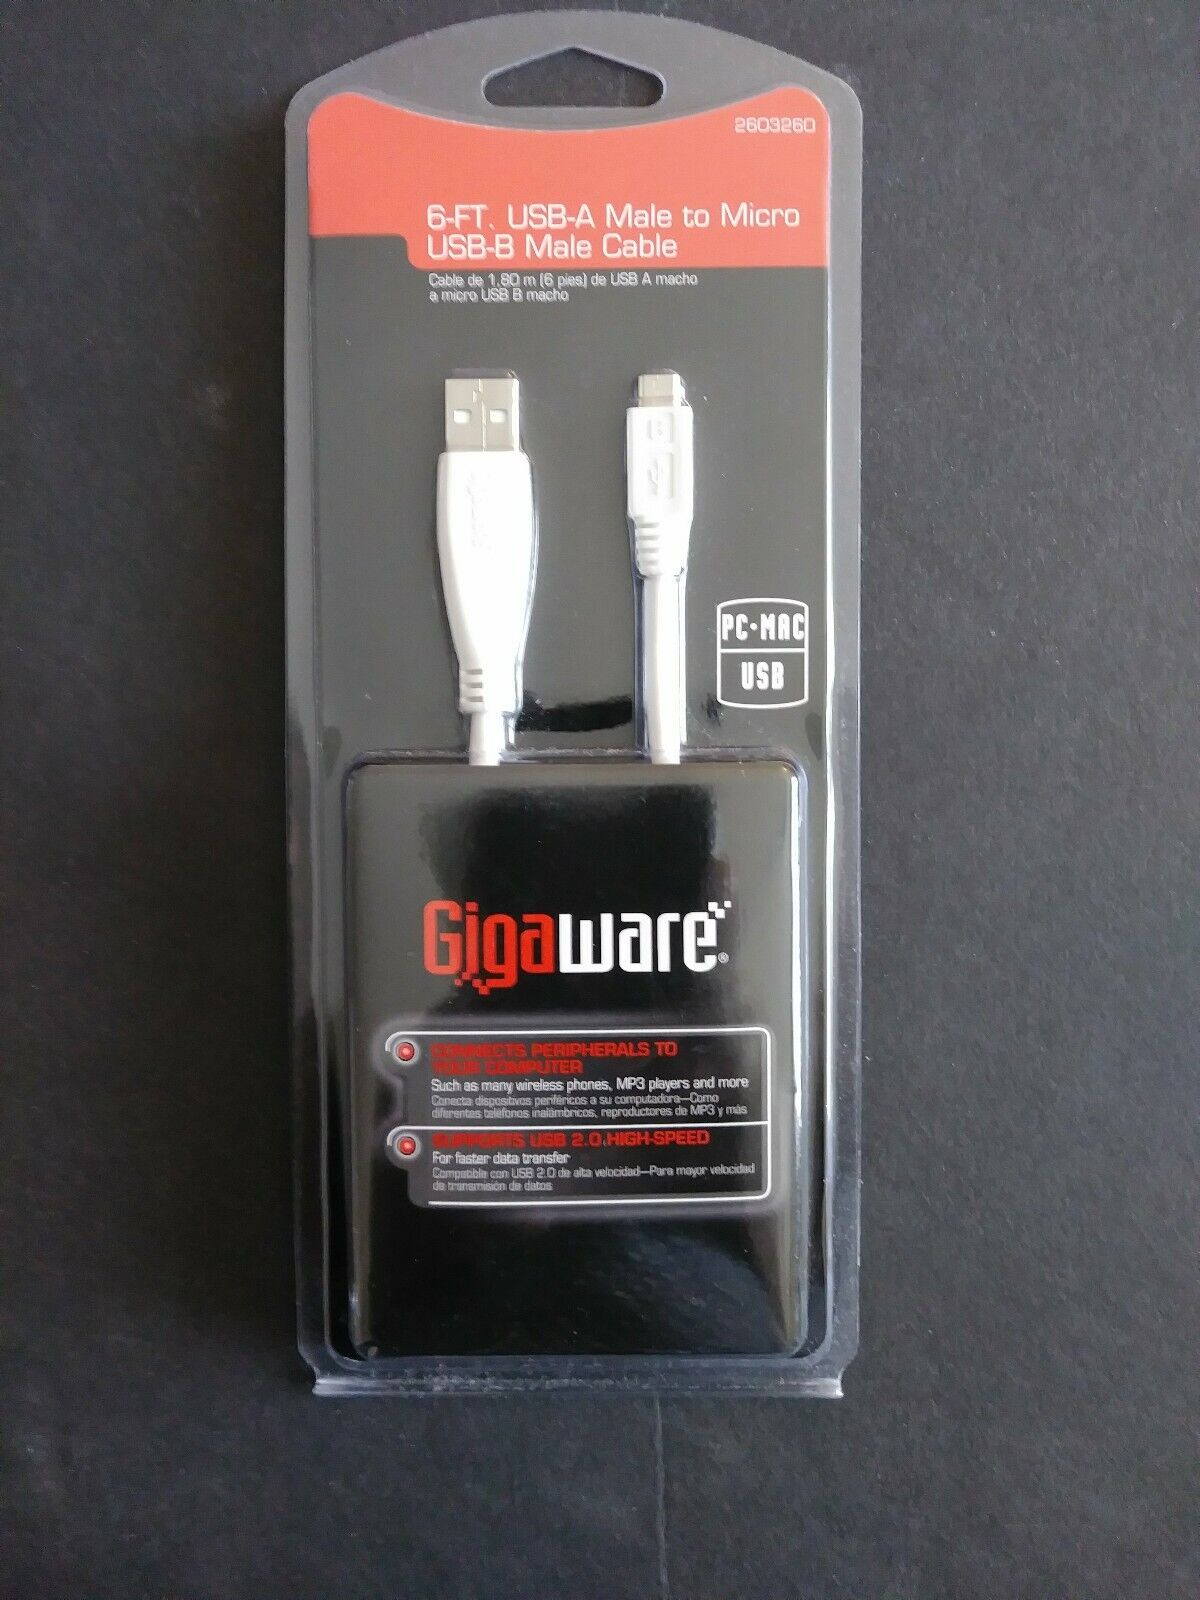 RadioShack Gigaware 6-FT USB-A Male to Micro USB-B Male Cable White 2603260